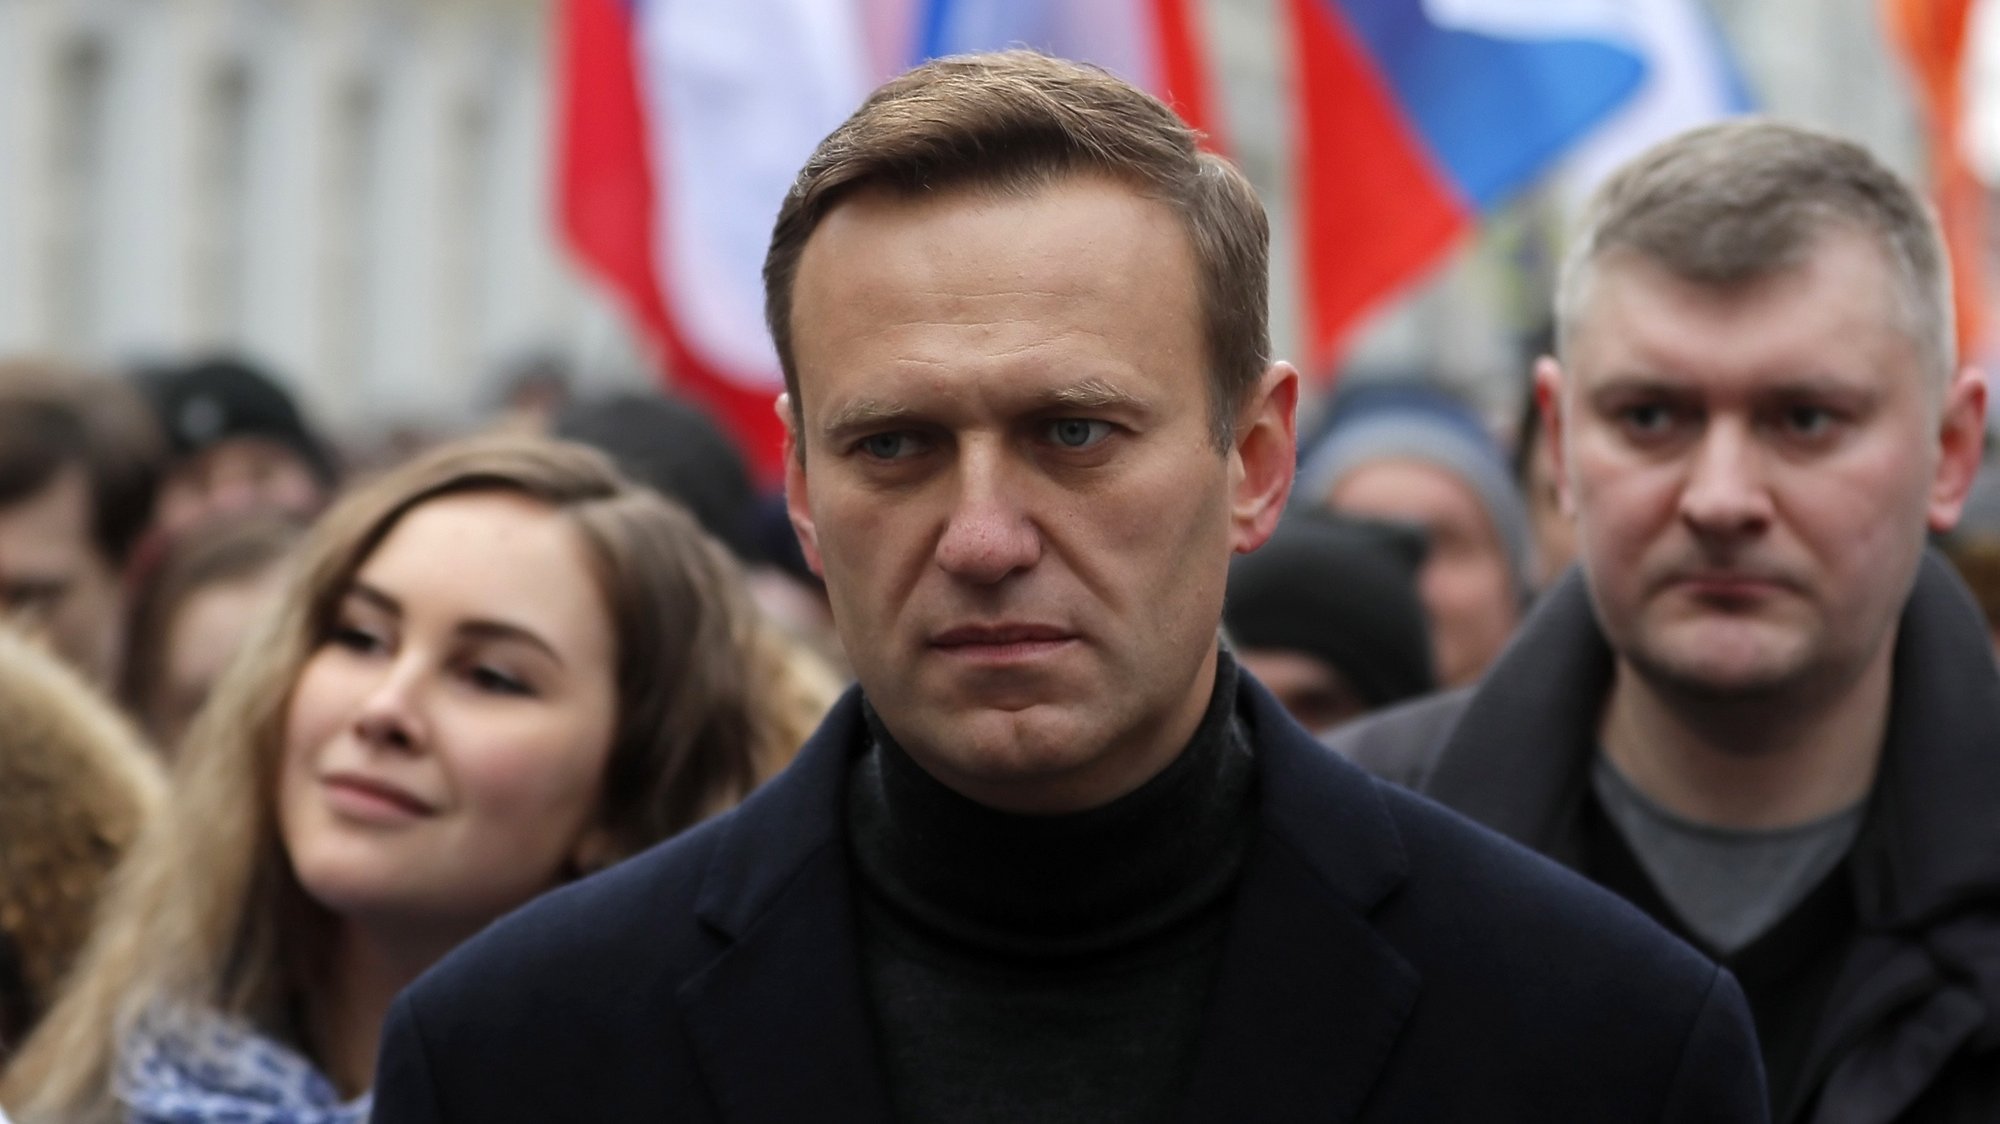 epa08934351 (FILE) - Russian opposition leader and anti-corruption activist Alexei Navalny (C) takes part in a memorial march for Boris Nemtsov marking the fifth anniversary of his assassination in Moscow, Russia, 29 February 2020 (reissued 13 January 2021). Navalny on 13 January 2021 stated on his Twitter account that he plans to travel to Moscow on Sunday, 17 January 2021.  EPA/YURI KOCHETKOV *** Local Caption *** 56313826